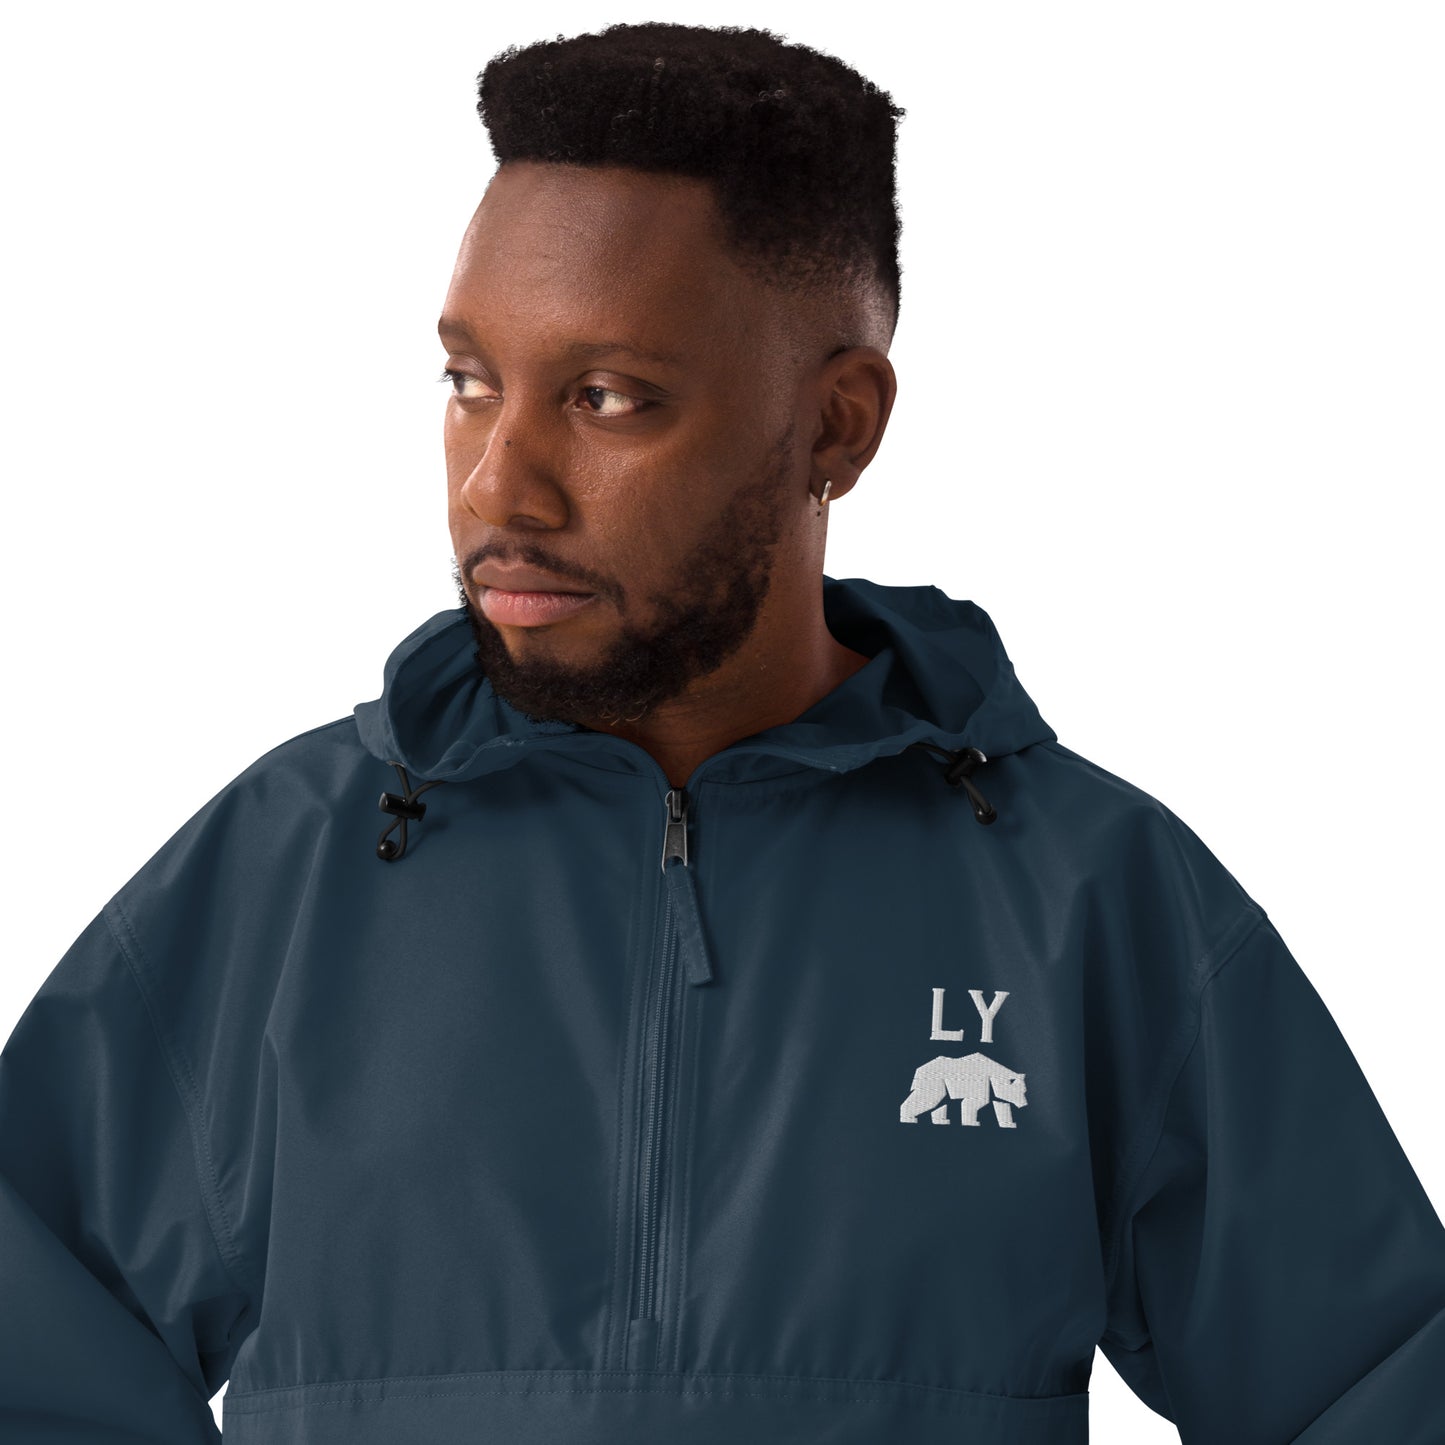 “LY” White on Blue/Navy Adult Champion Packable Jacket